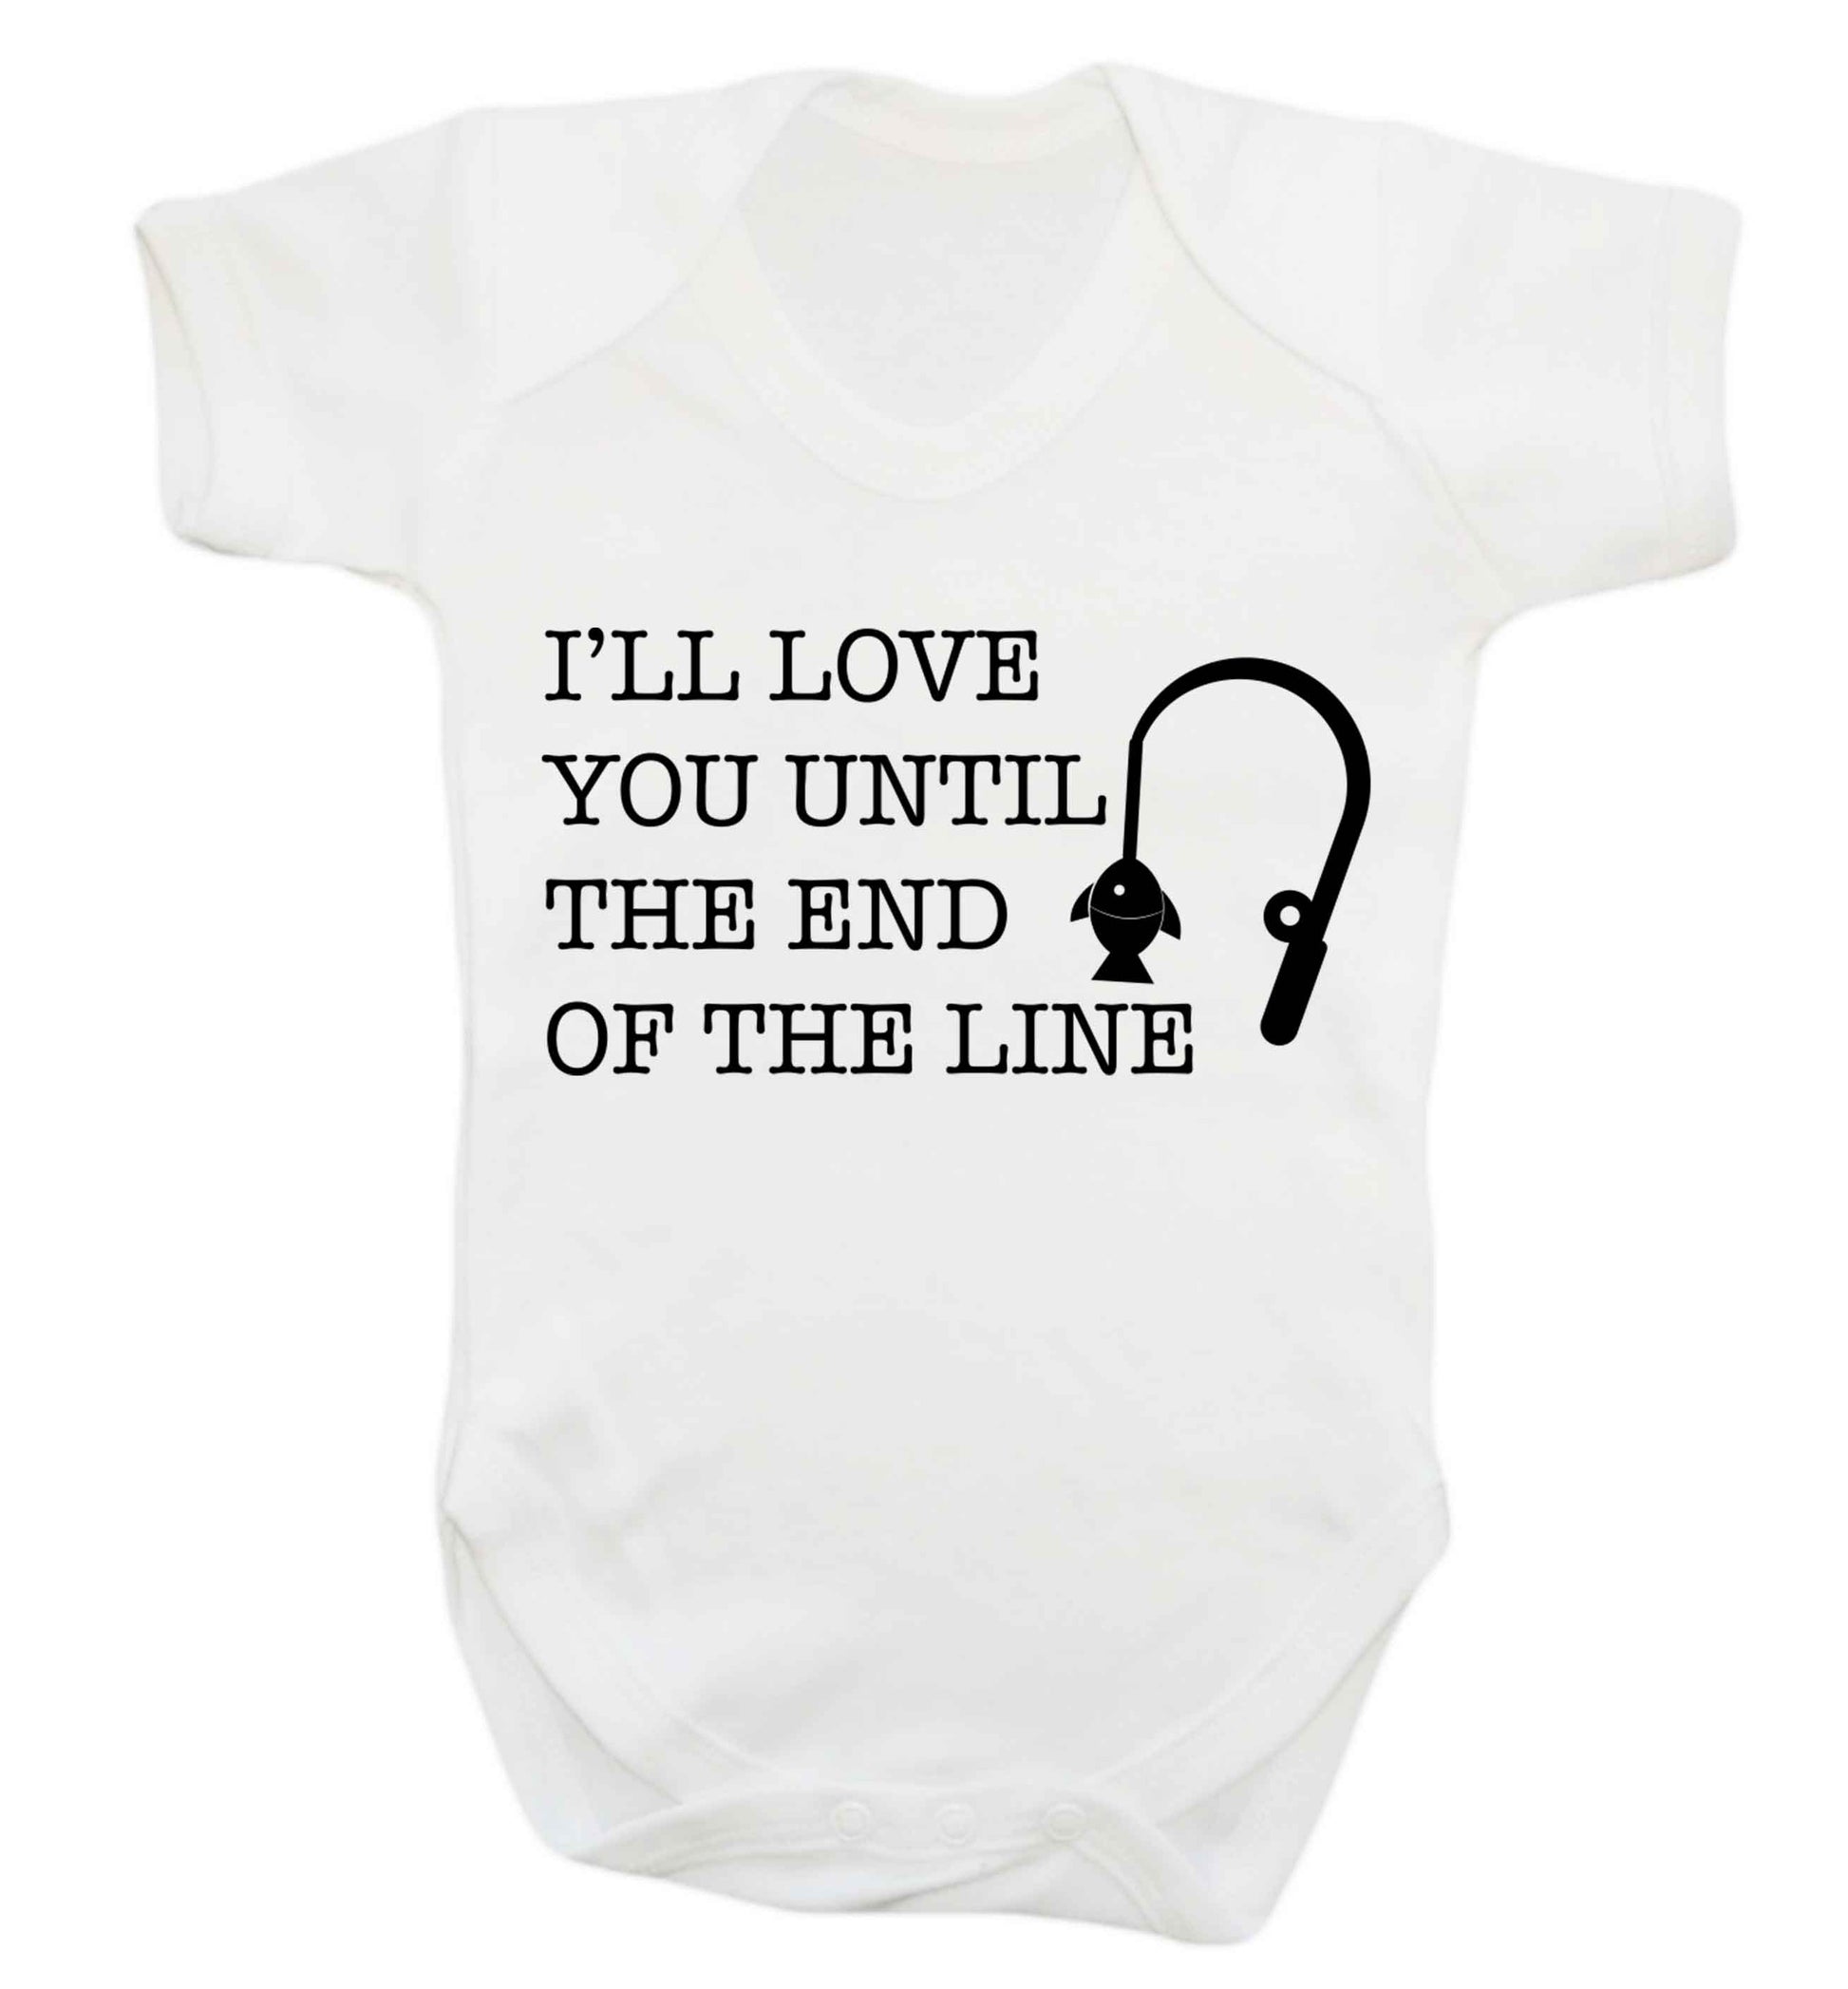 I'll love you until the end of the line Baby Vest white 18-24 months